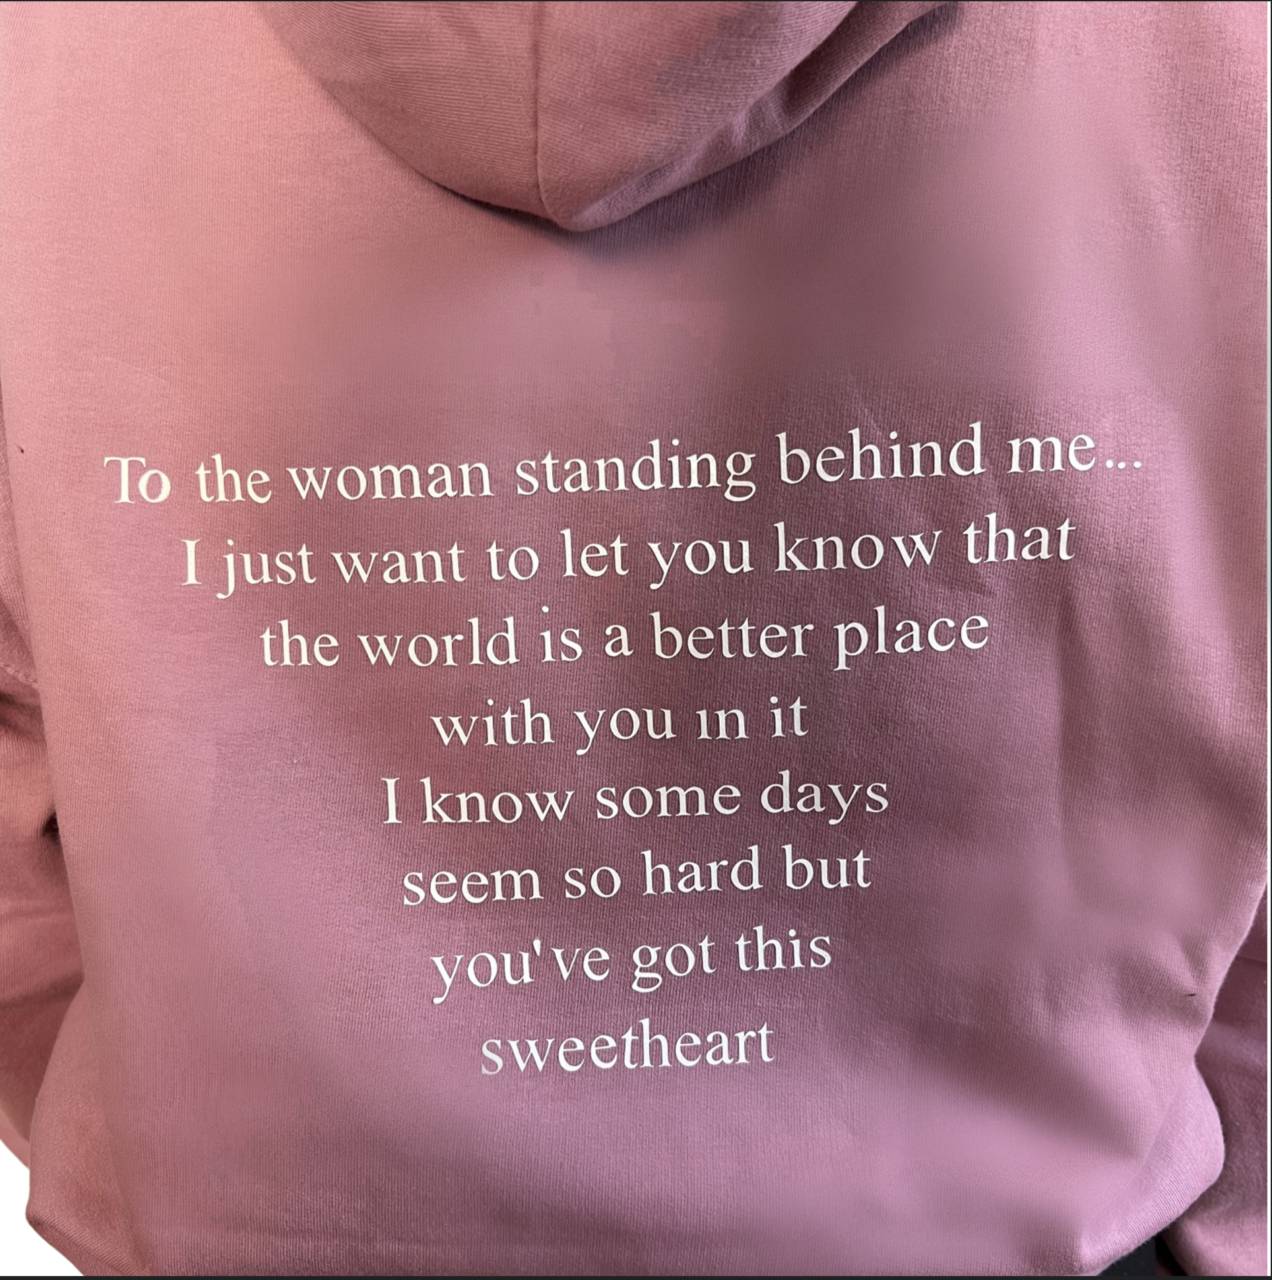 The World Is a Better Place Hoodie (purple)